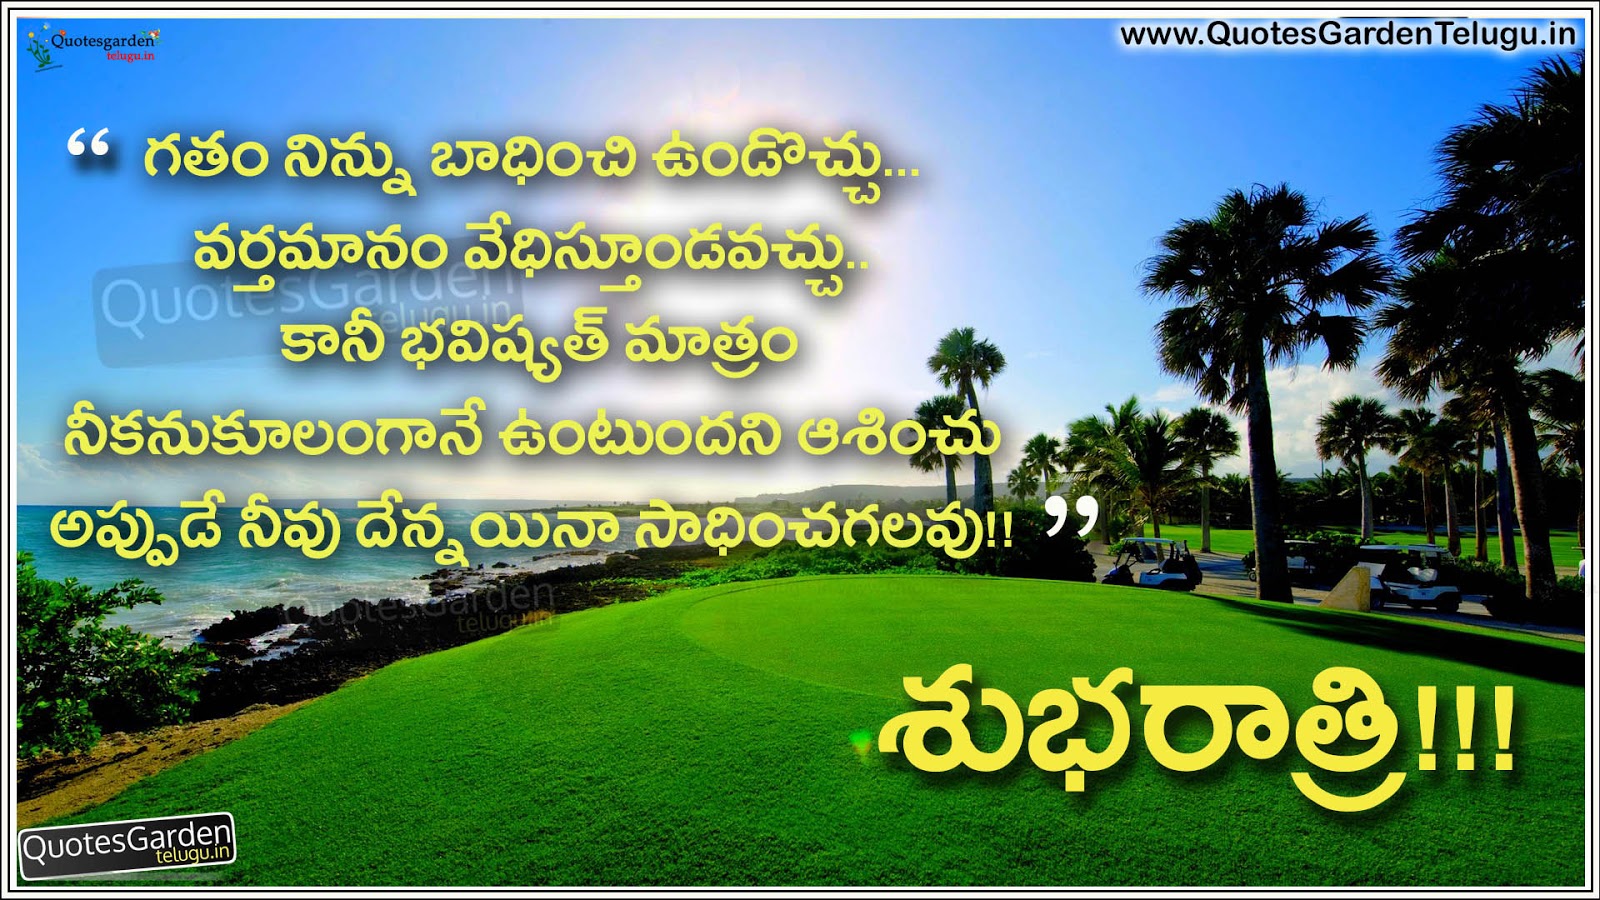 Best Telugu Good night status messages for whatsapp | QUOTES ...